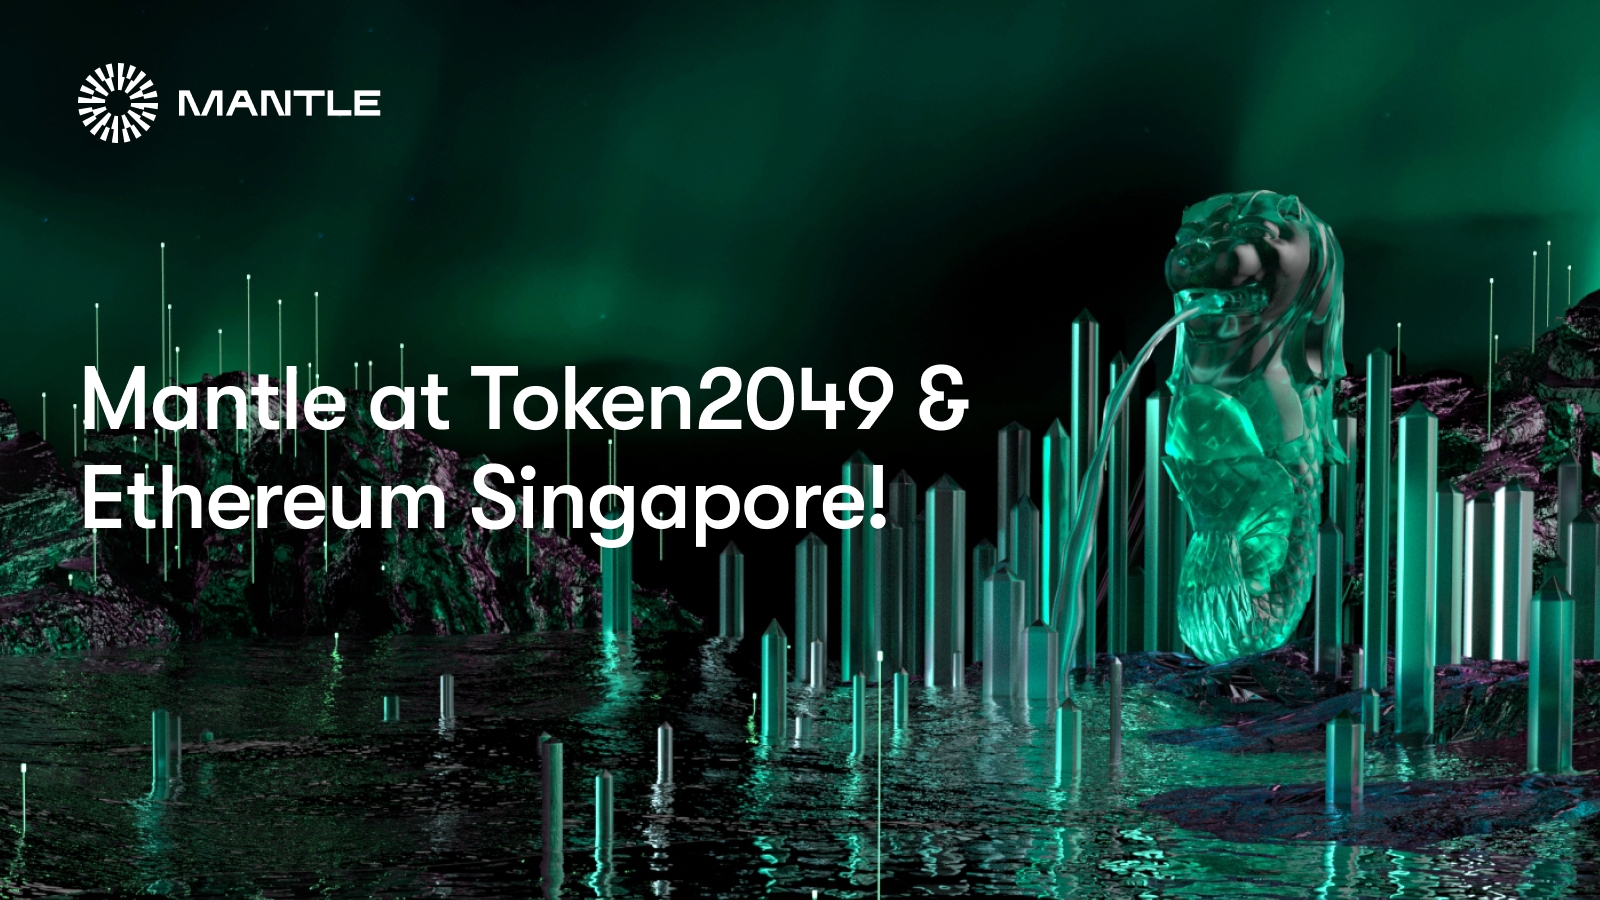 Mantle in Singapore: Get Ready for Token2049 and Ethereum Singapore!